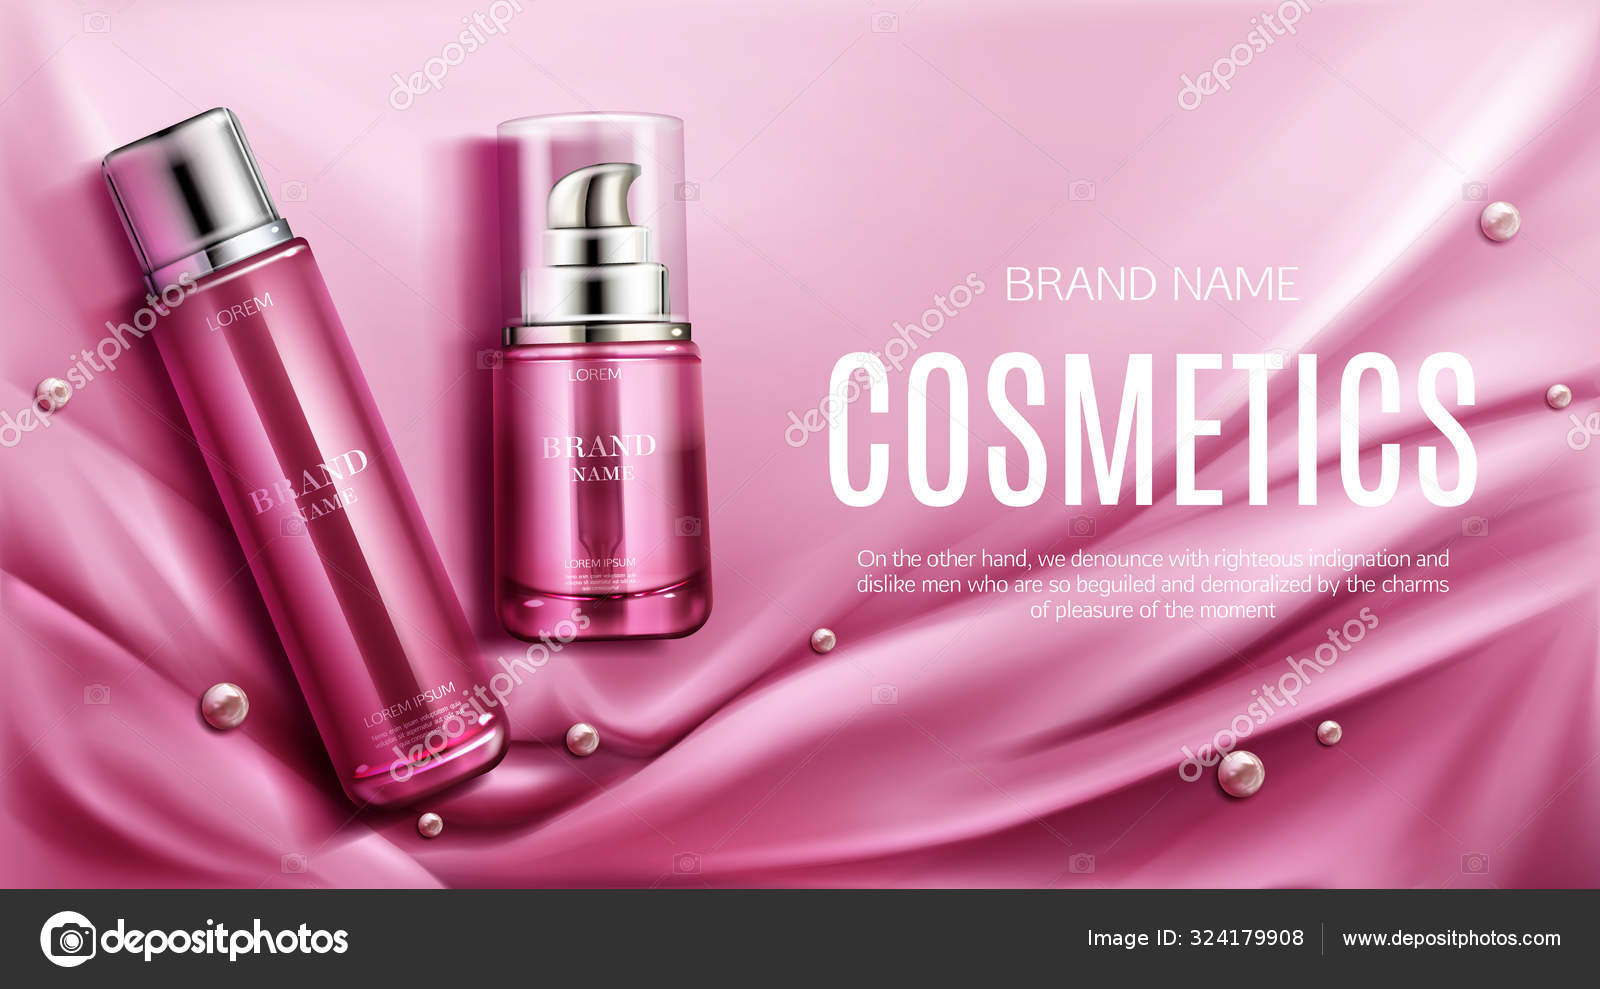 Download Cosmetics Tubes Mockup Natural Spa Beauty Product Vector Image By C Vectorpouch Vector Stock 324179908